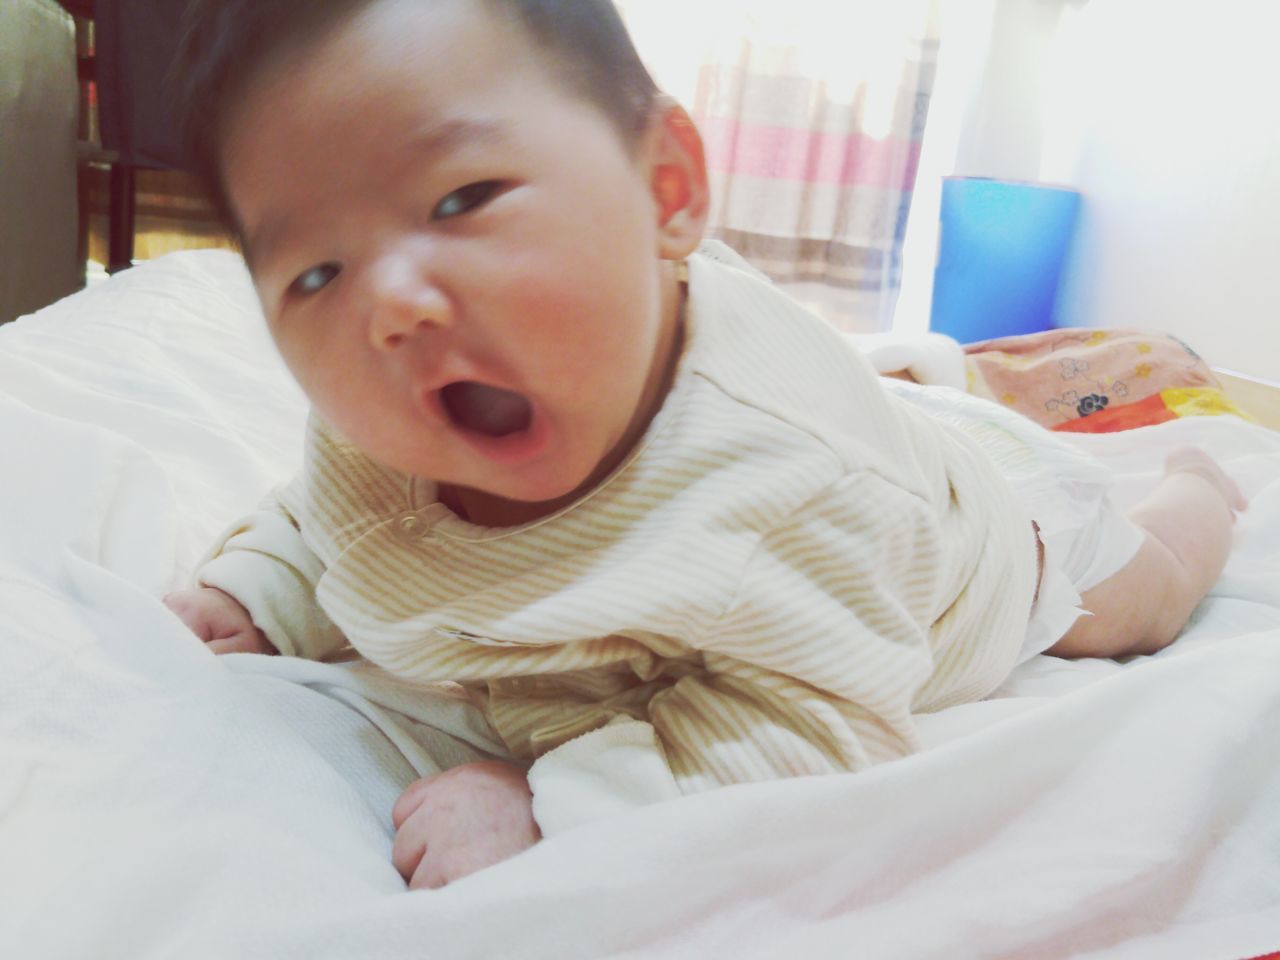 baby, indoors, bed, childhood, innocence, babyhood, toddler, cute, one person, bedroom, real people, home interior, yawning, pacifier, stuffed toy, pillow, close-up, babies only, day, people